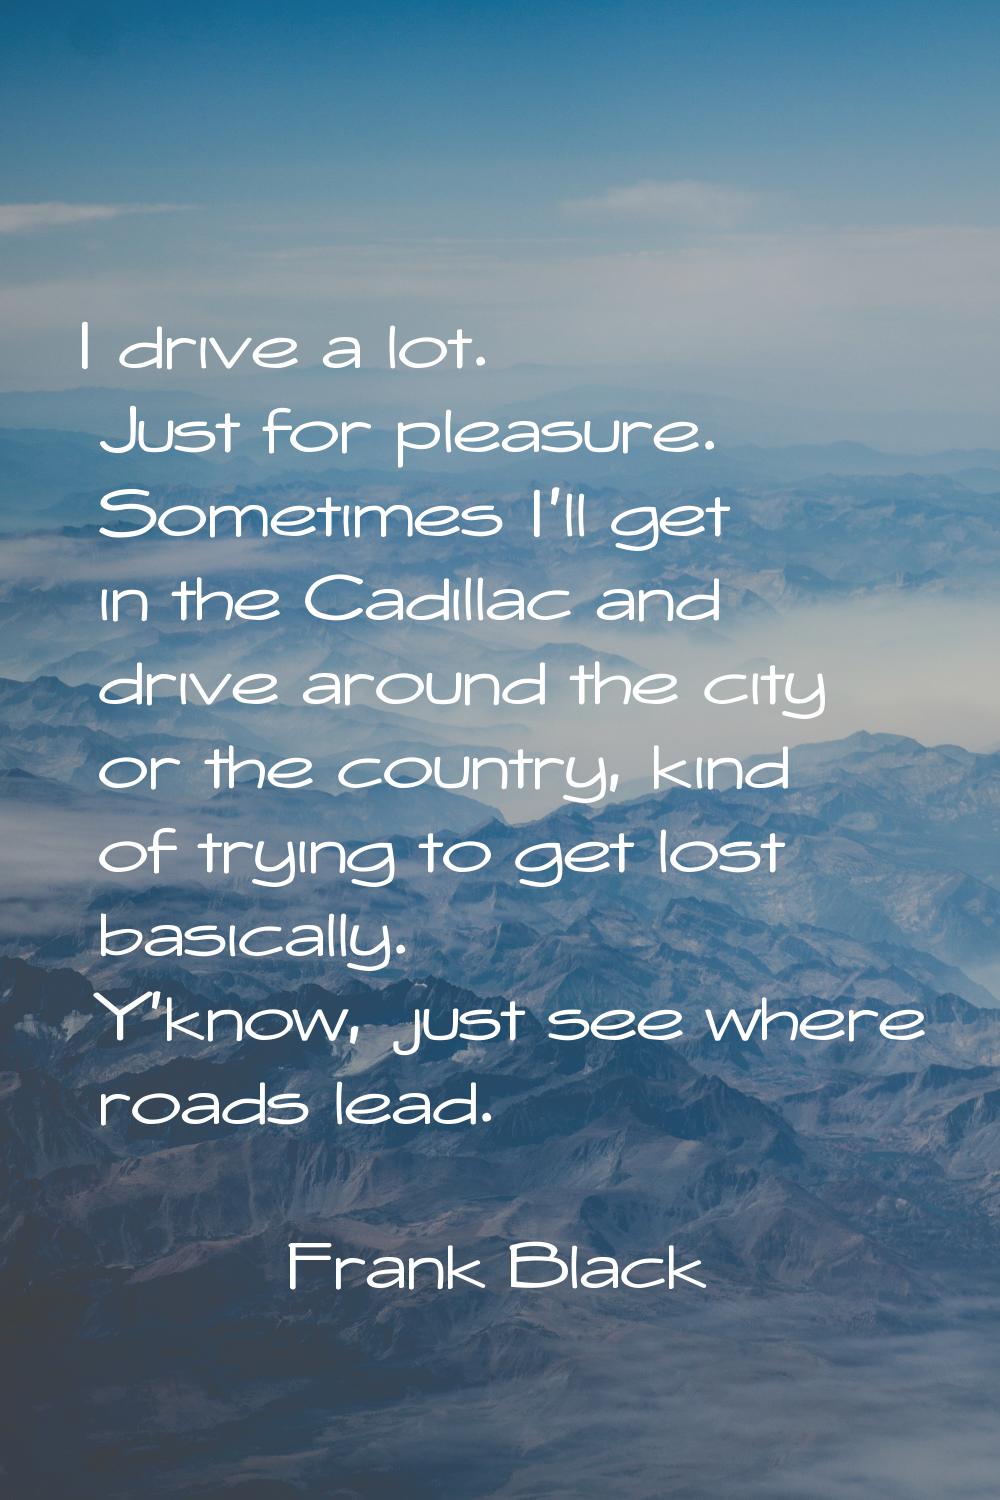 I drive a lot. Just for pleasure. Sometimes I'll get in the Cadillac and drive around the city or t